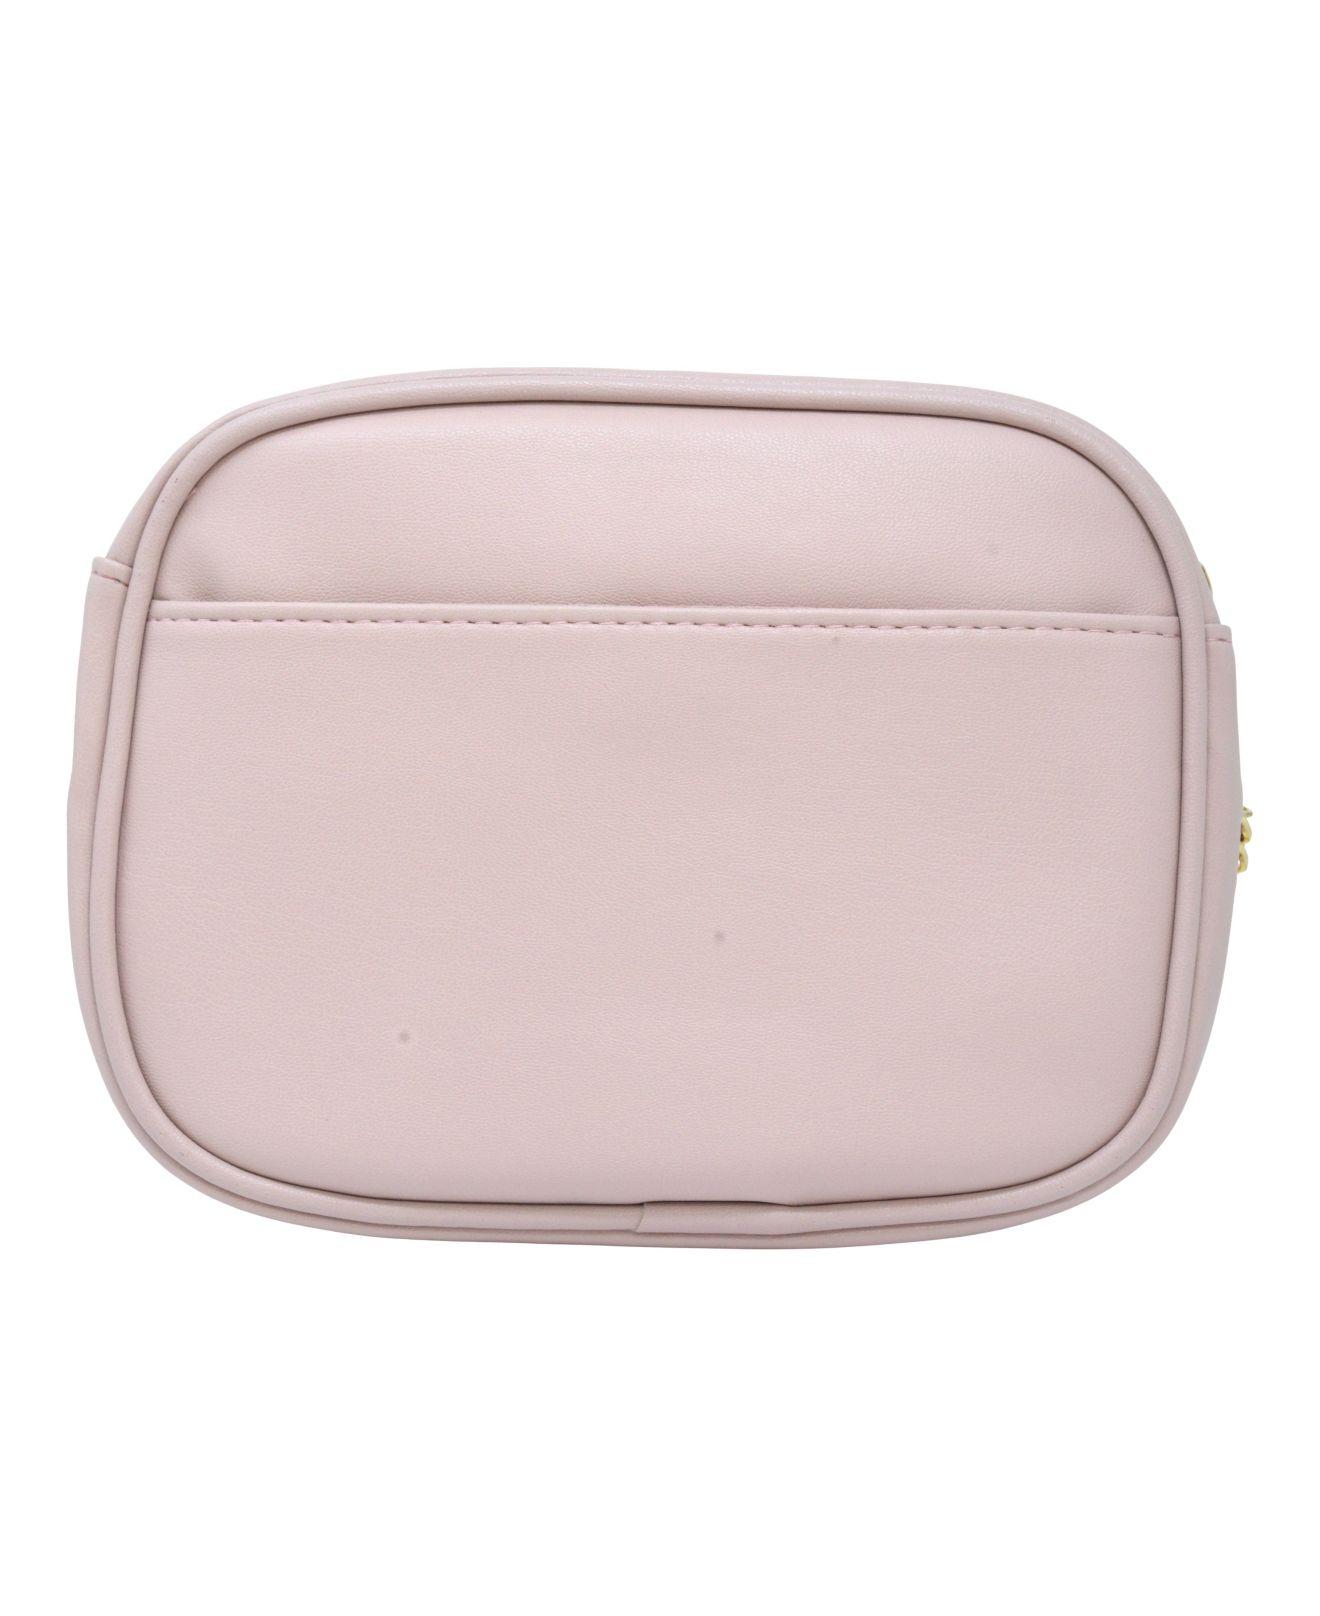 Bebe Gio Square Crossbody Bag in Pink | Lyst